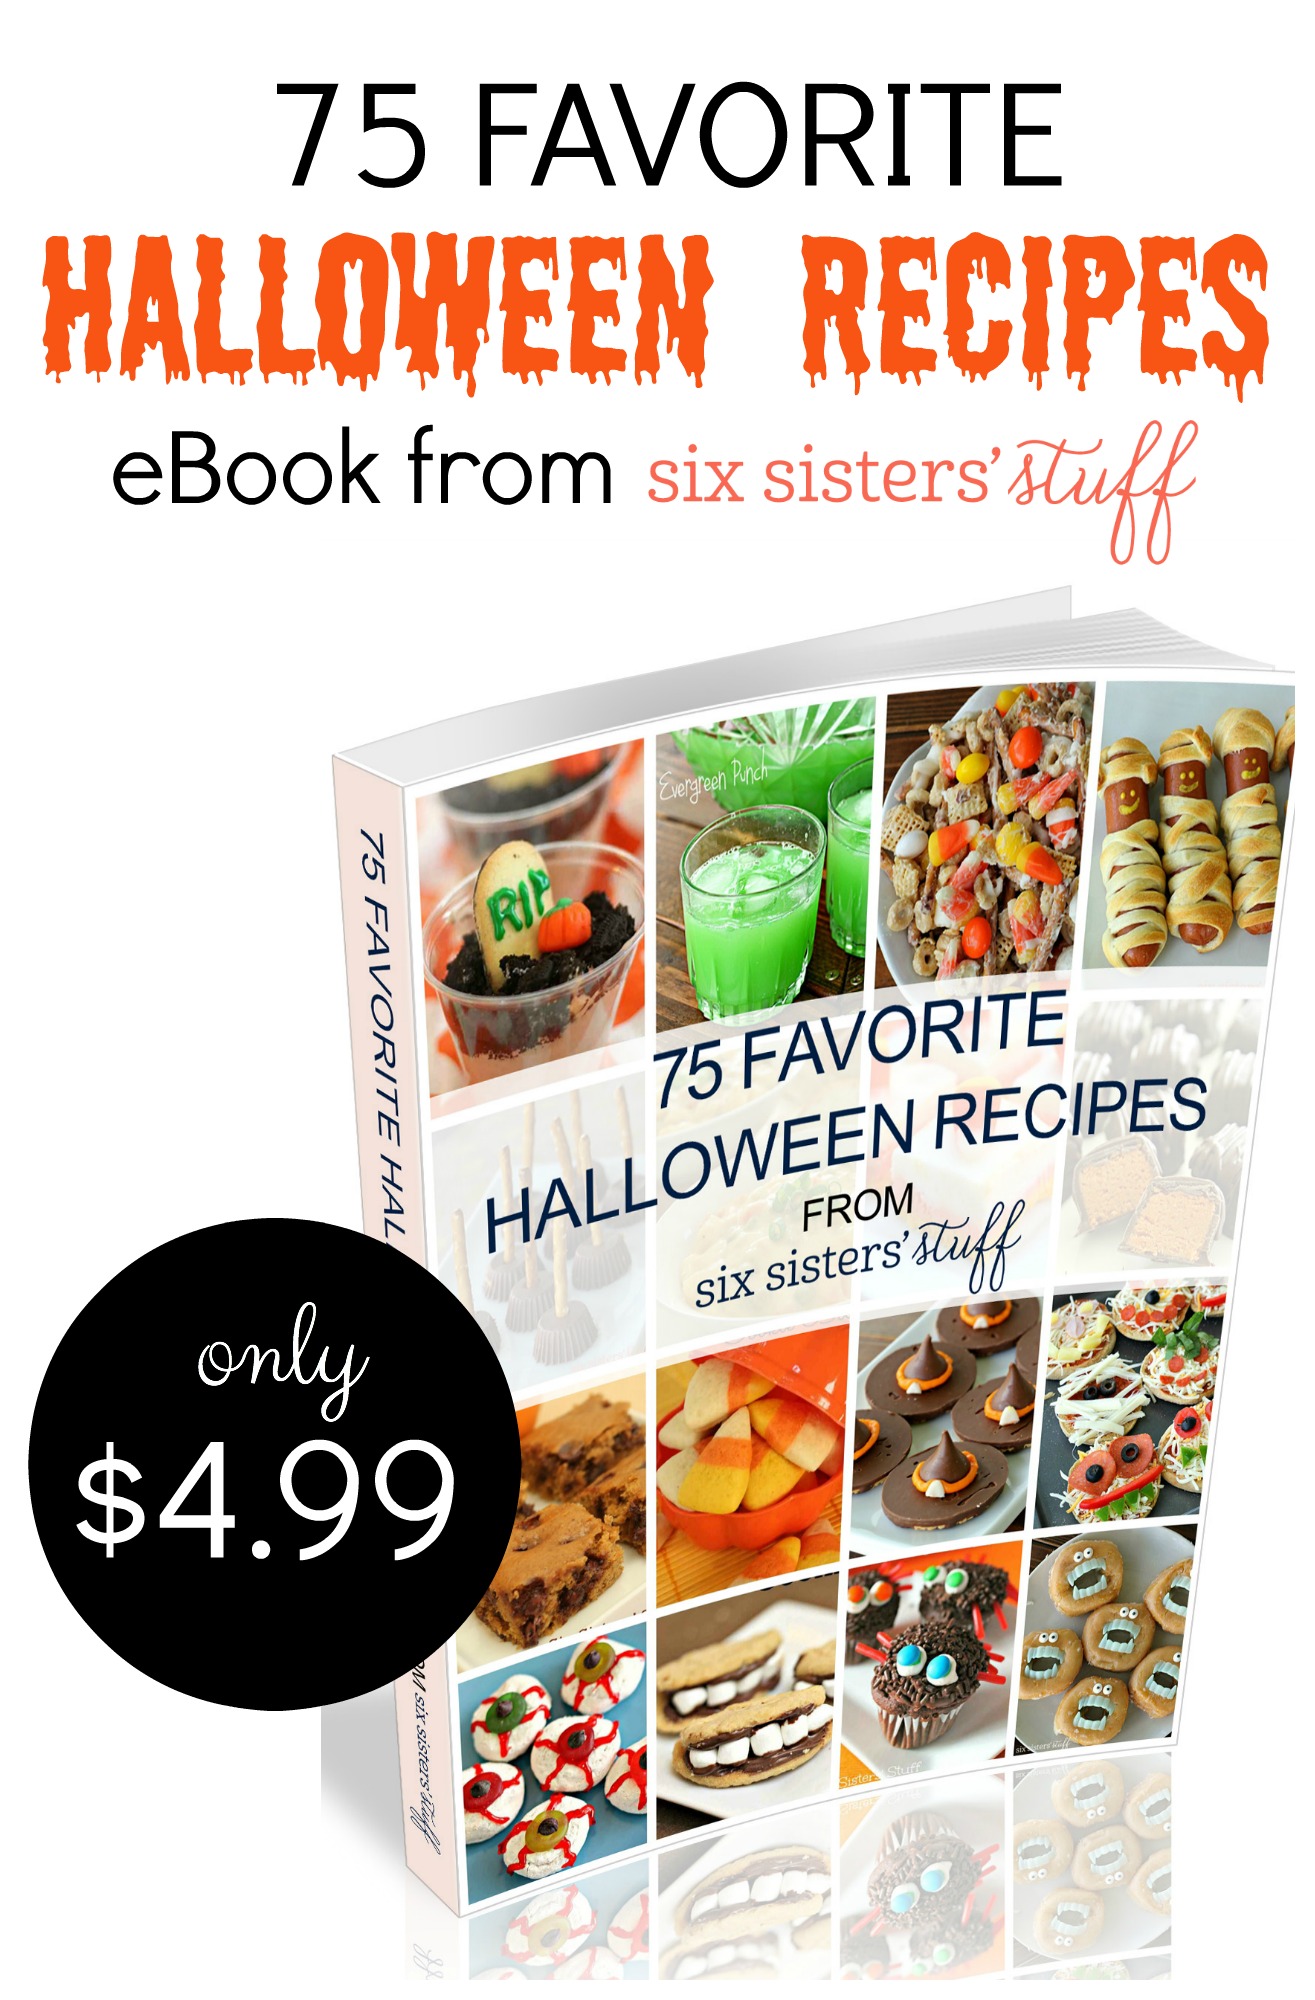 75 Favorite Halloween Recipes eBook from Six Sisters’ Stuff